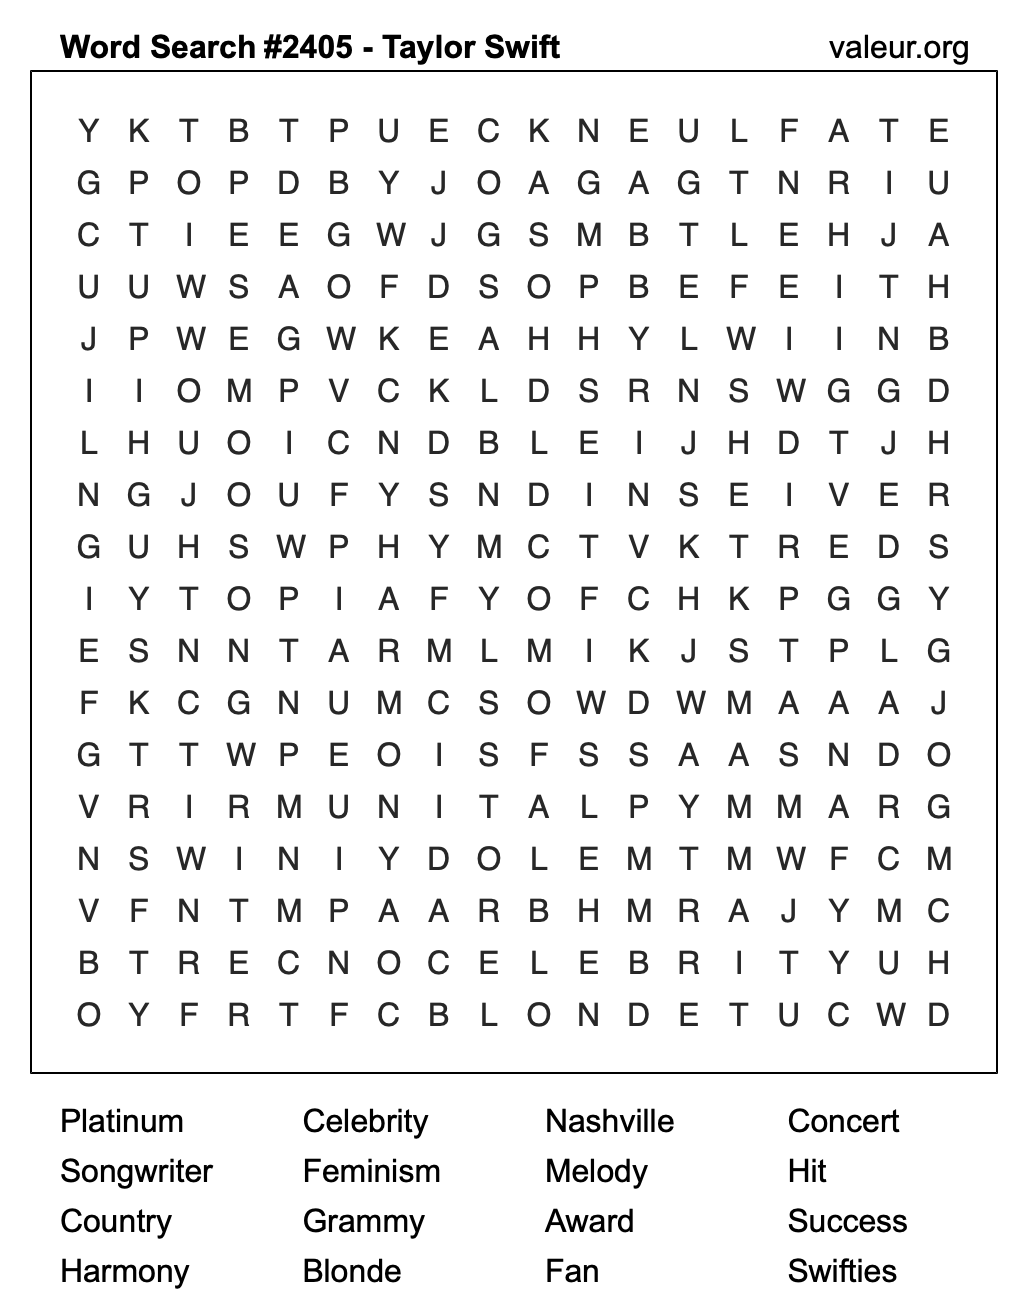 Taylor Swift Word Search Puzzle #2405